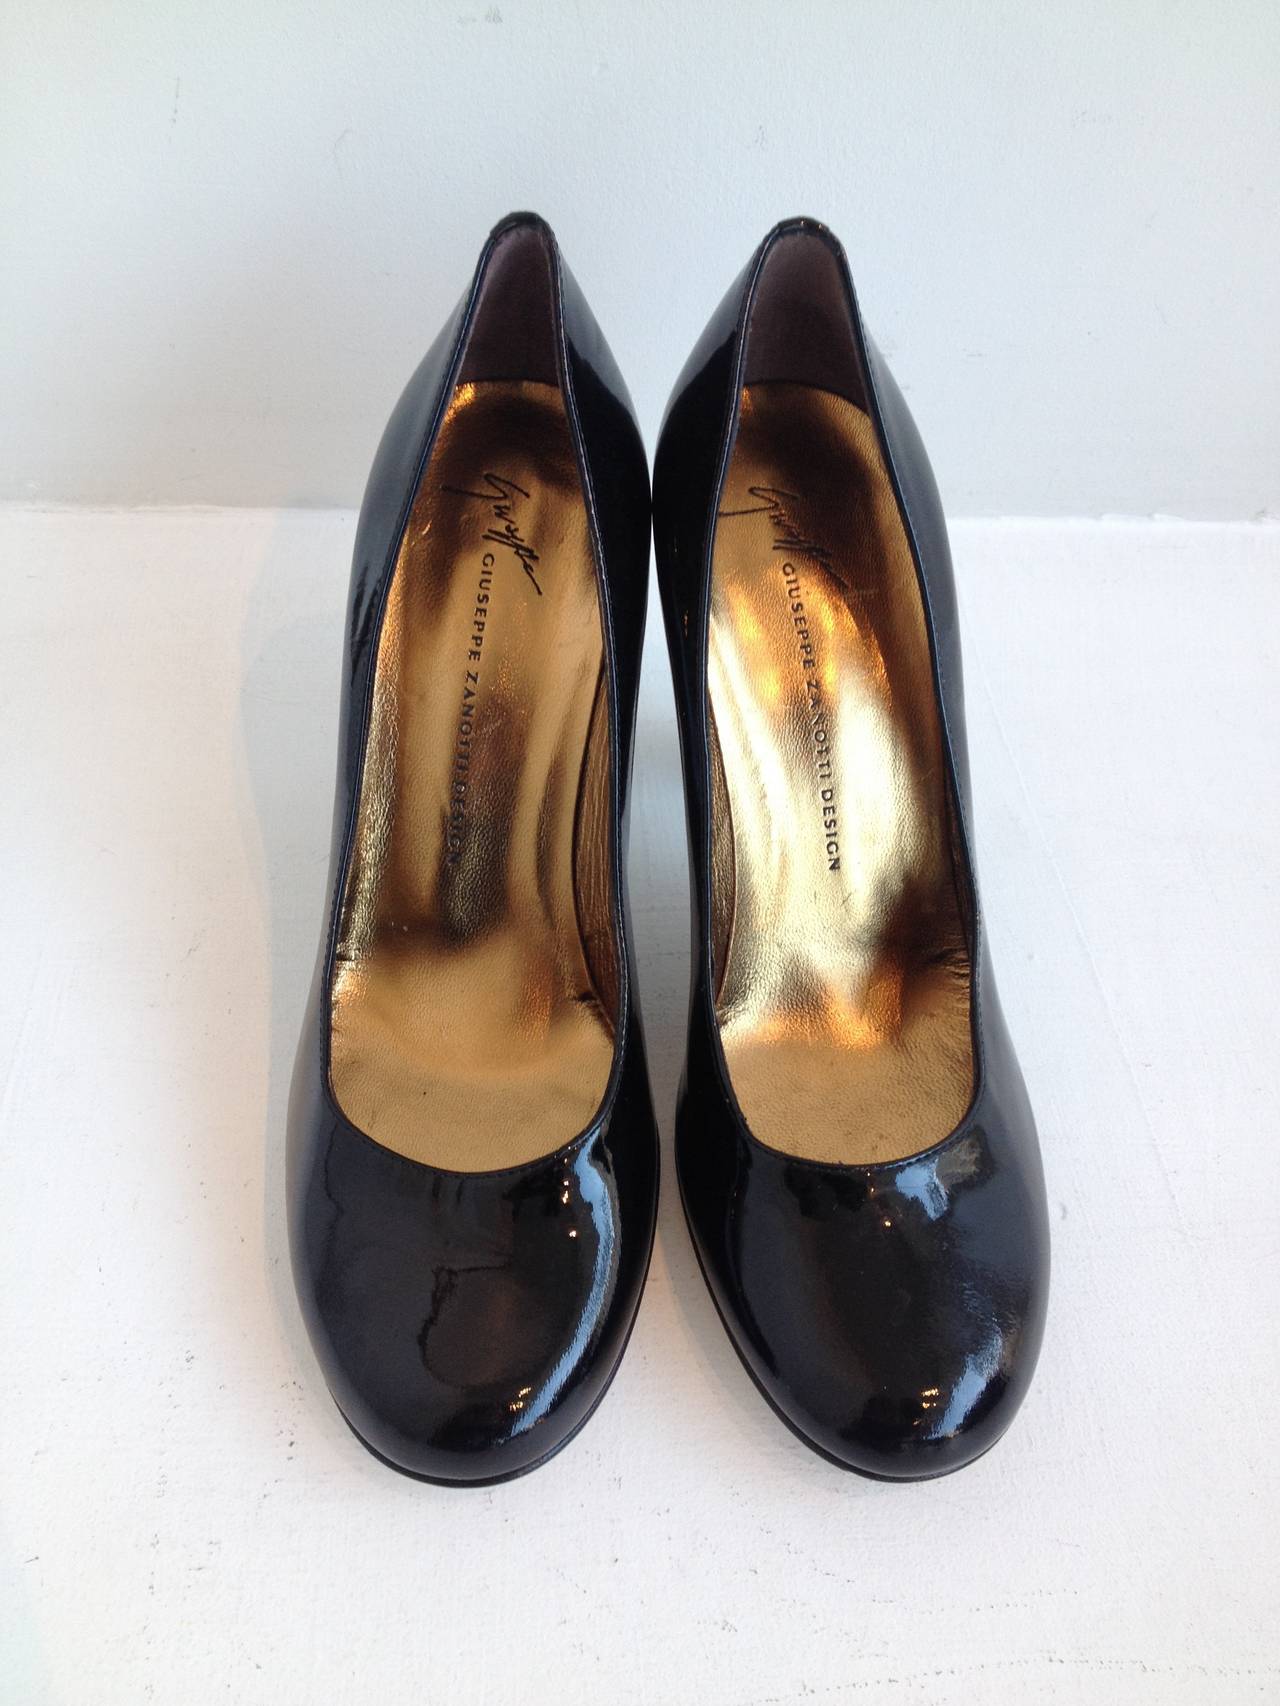 These pumps are a superb addition to any wardrobe. The black patent round-toed body of the shoe has a simplicity that belies the incredible ornate heel - wrought in a glossy bronze-toned metal, it has a fluted shape and textured hammered finish that